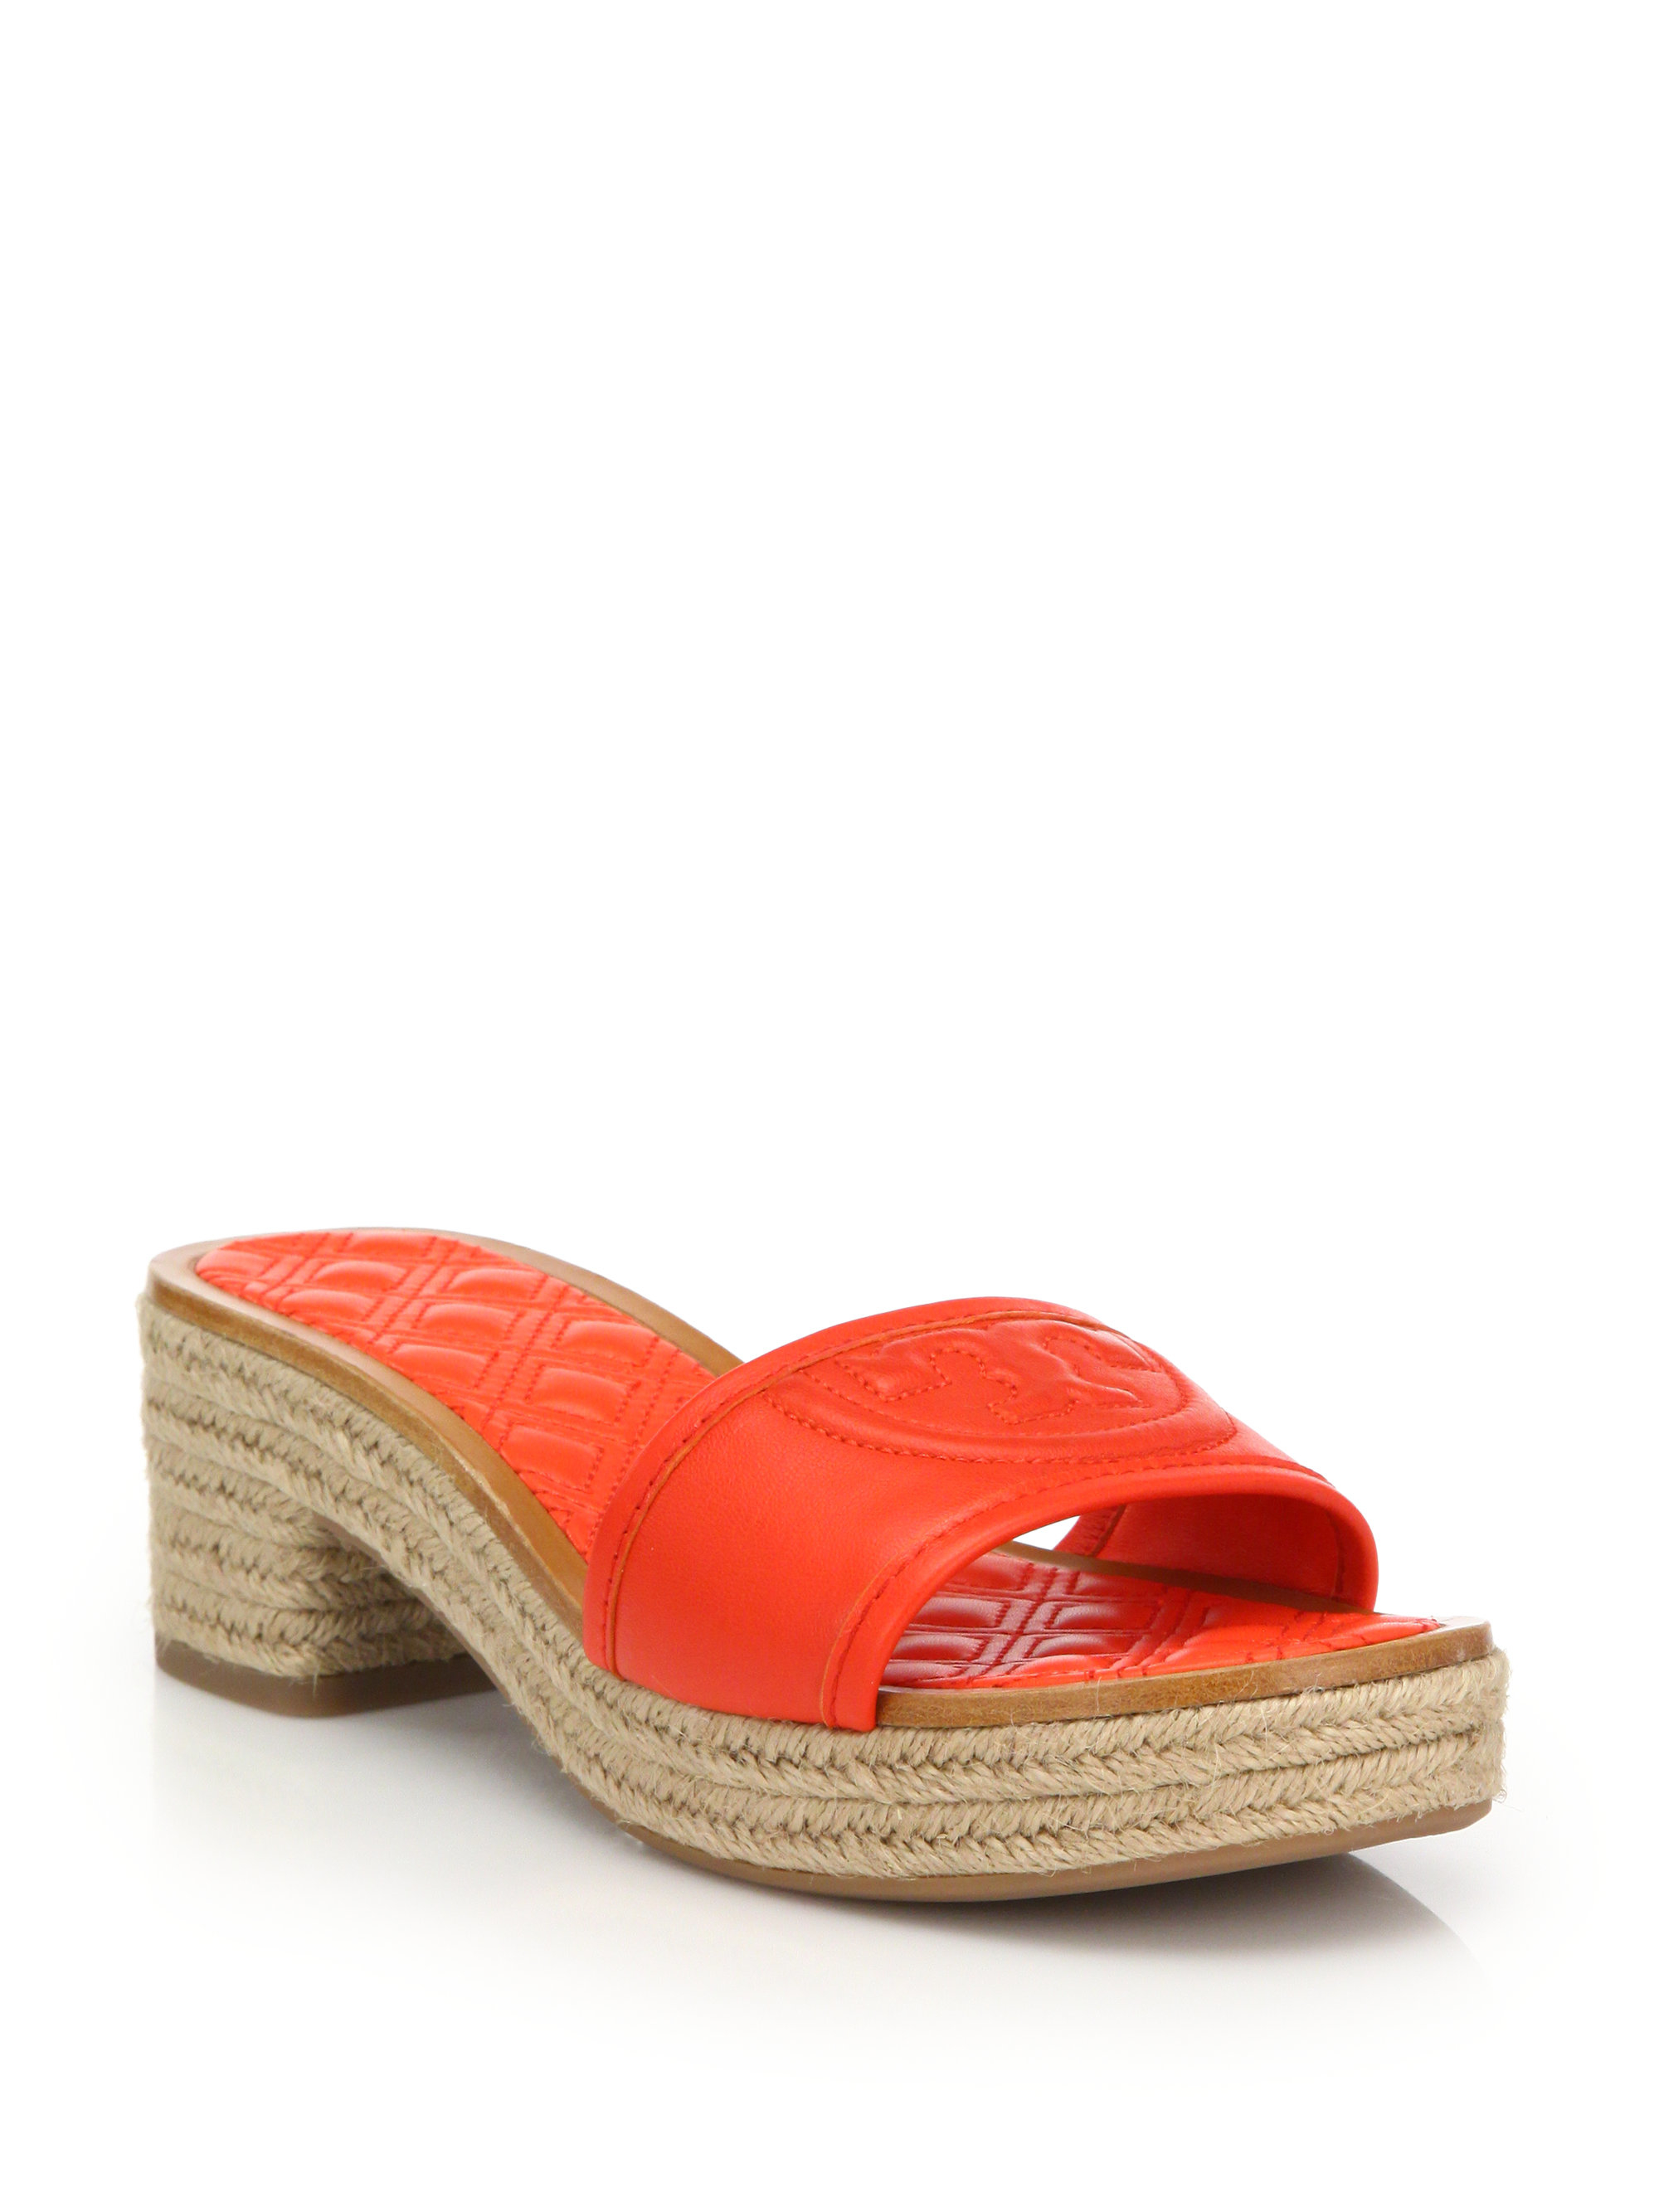 Lyst - Tory Burch Fleming Quilted Leather Espadrille Slide Sandals in Red